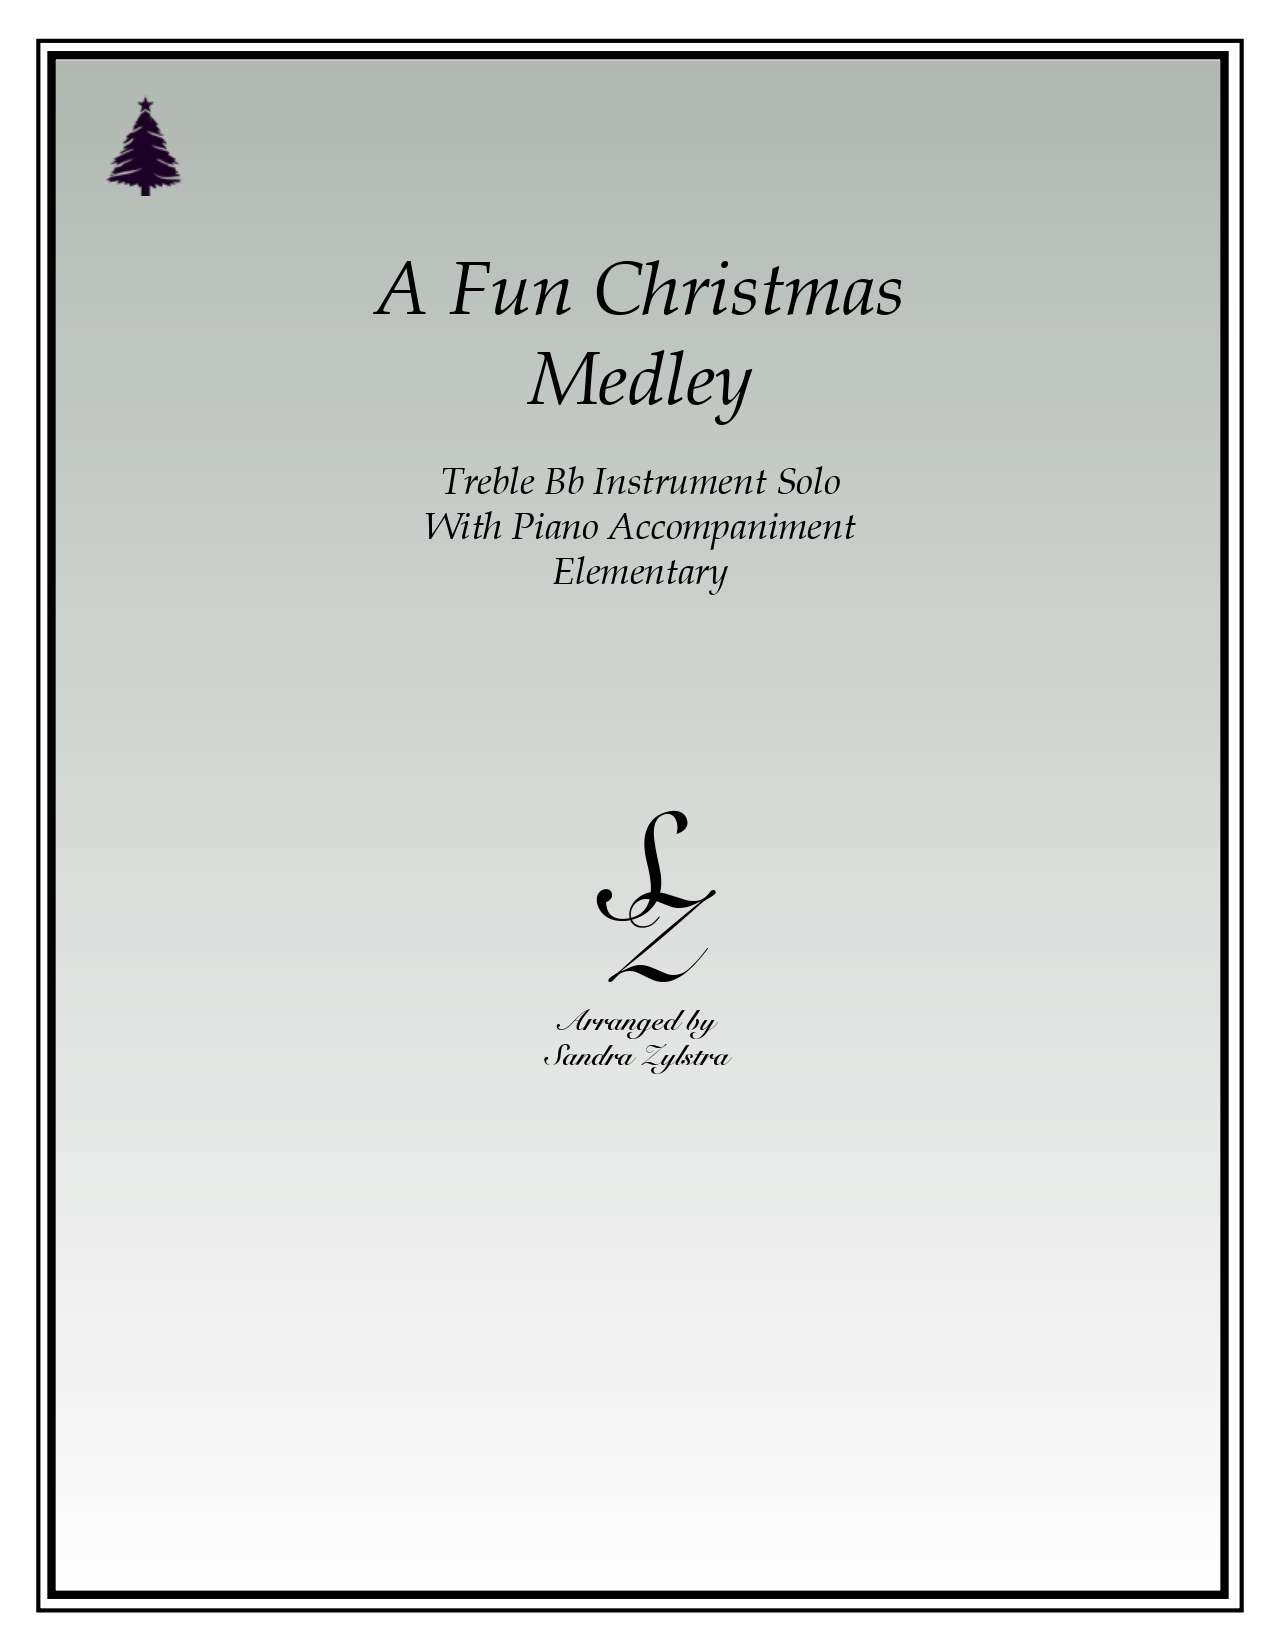 A Fun Christmas Medley Bb instrument solo parts cover page 00011